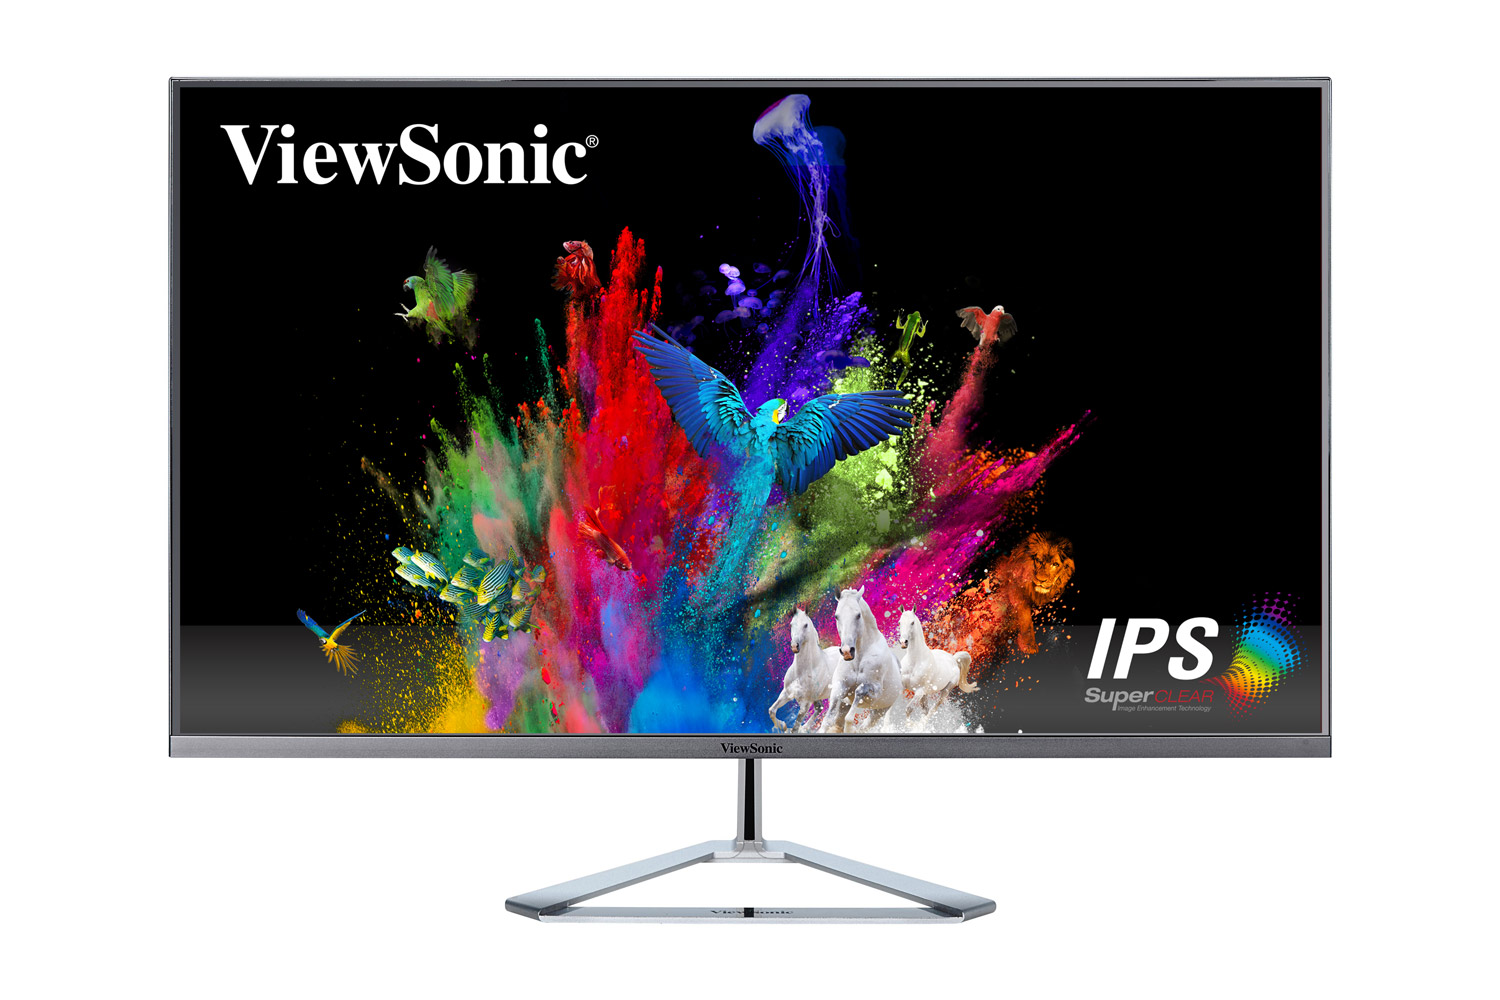 Viewsonic 32in IPS Monitor with Speakers (VX3276-MHD)